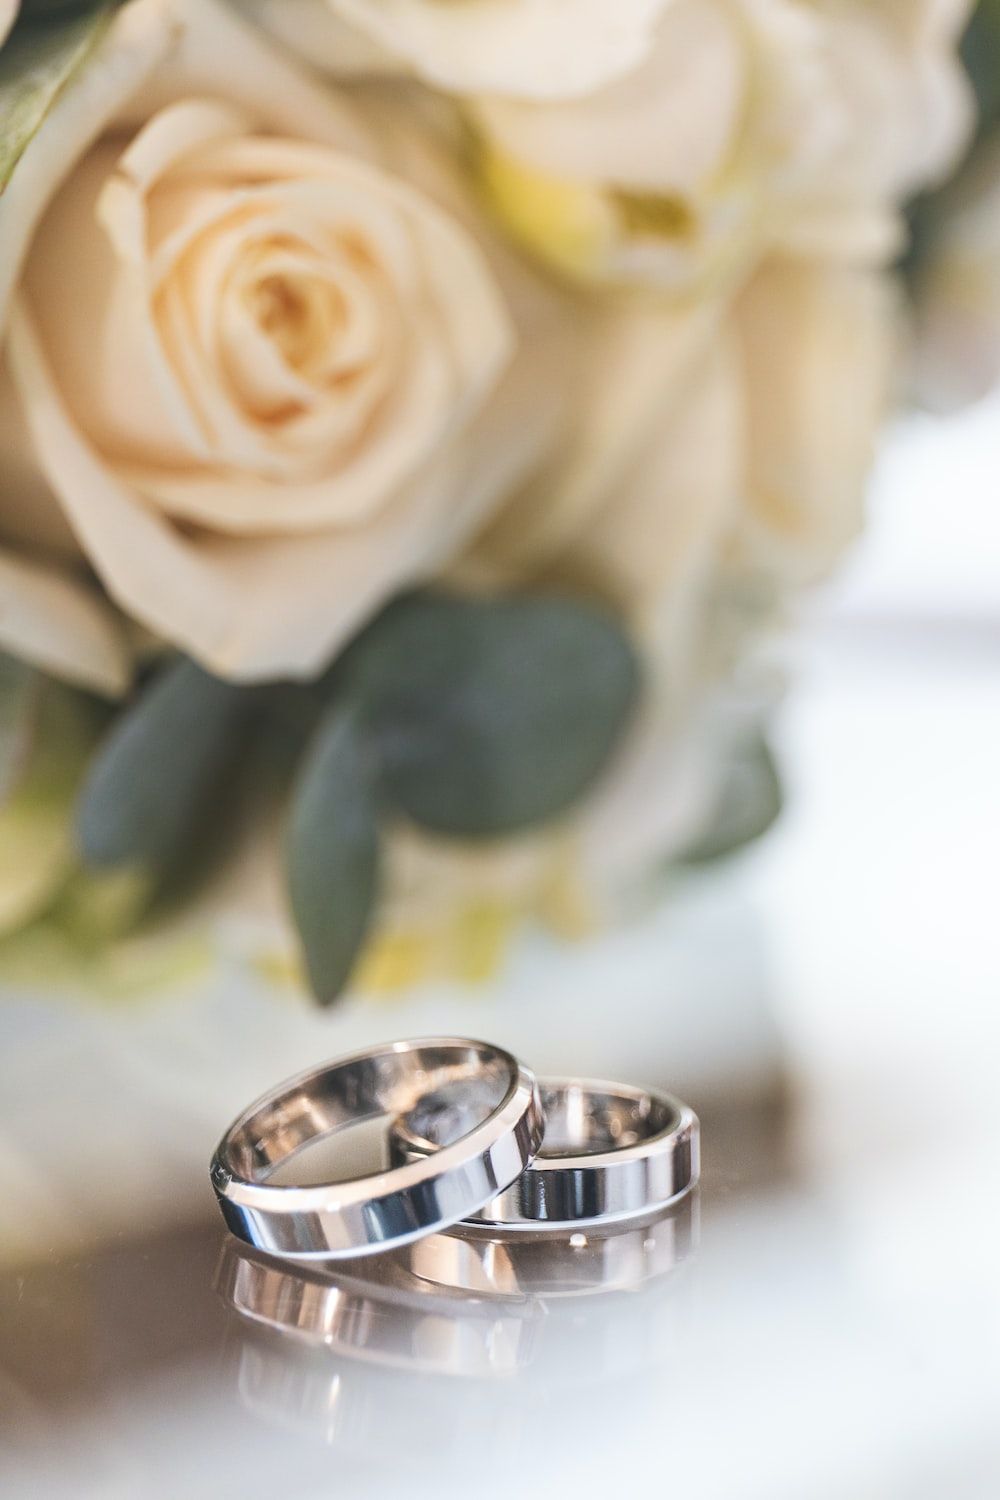 Wedding Rings Picture. Download Free Image